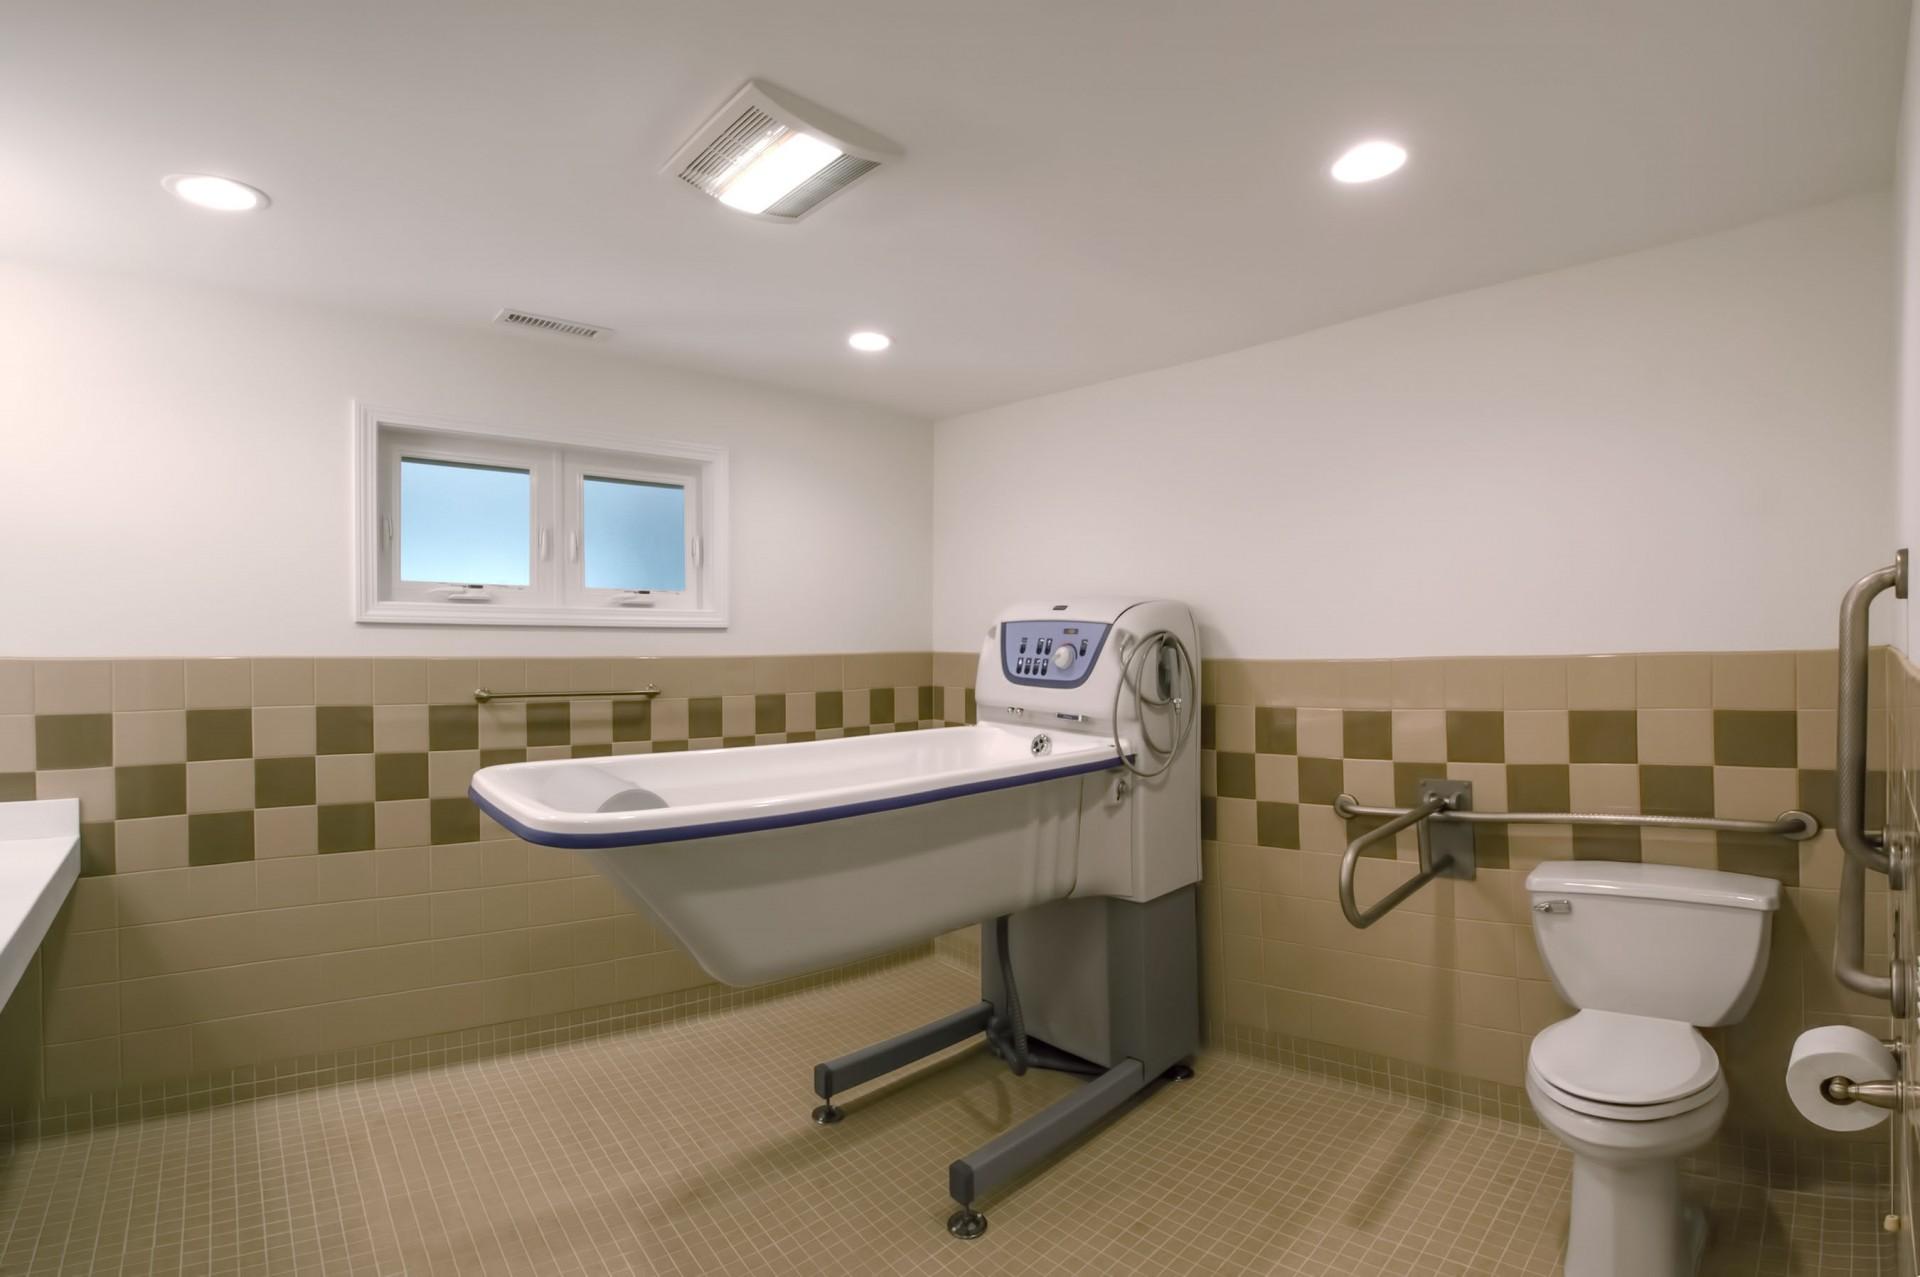 Bathroom with accessible fixtures